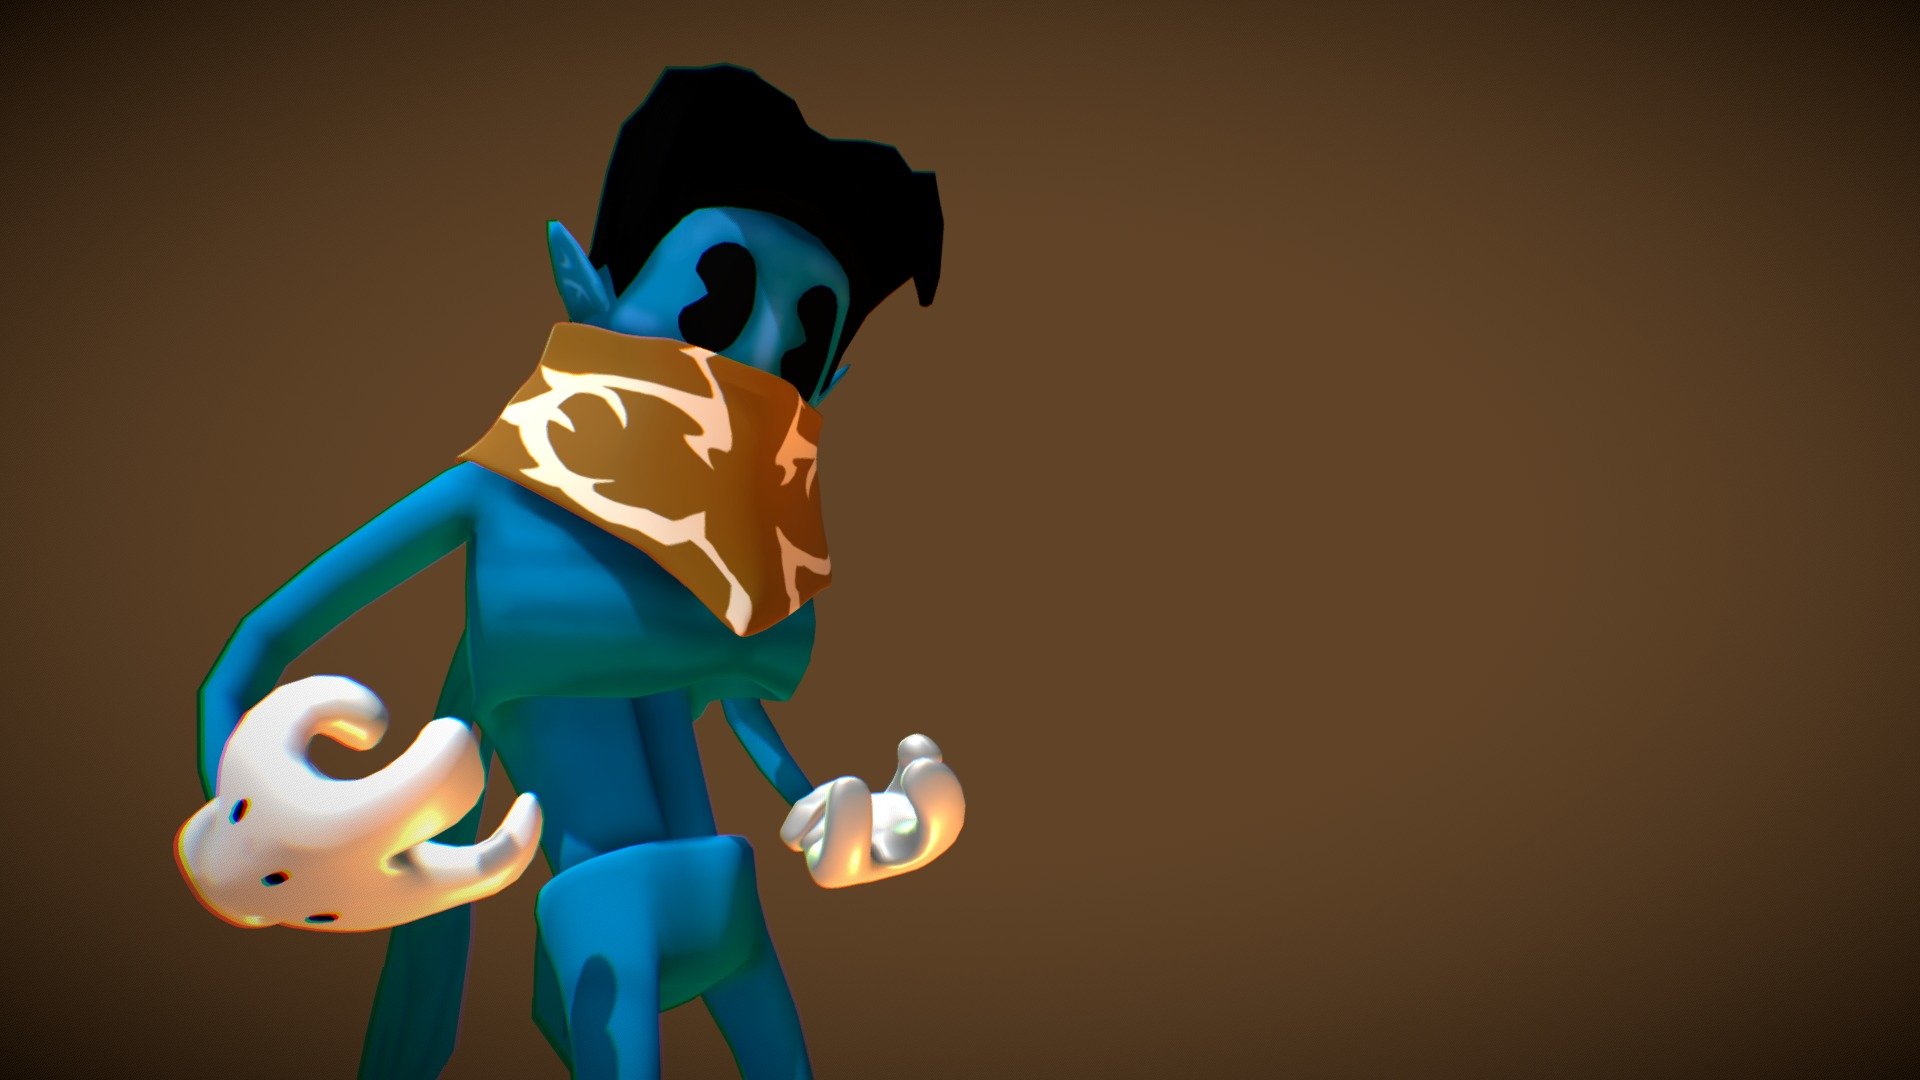 Model of Raziel from Legacy of Kain stylized in 1920's cartoon.

Designed for my Soul reaver's snow ball/diorama.
Testing animation export - Cartoon Raziel - animation - 3D model by Naxyo 3d model